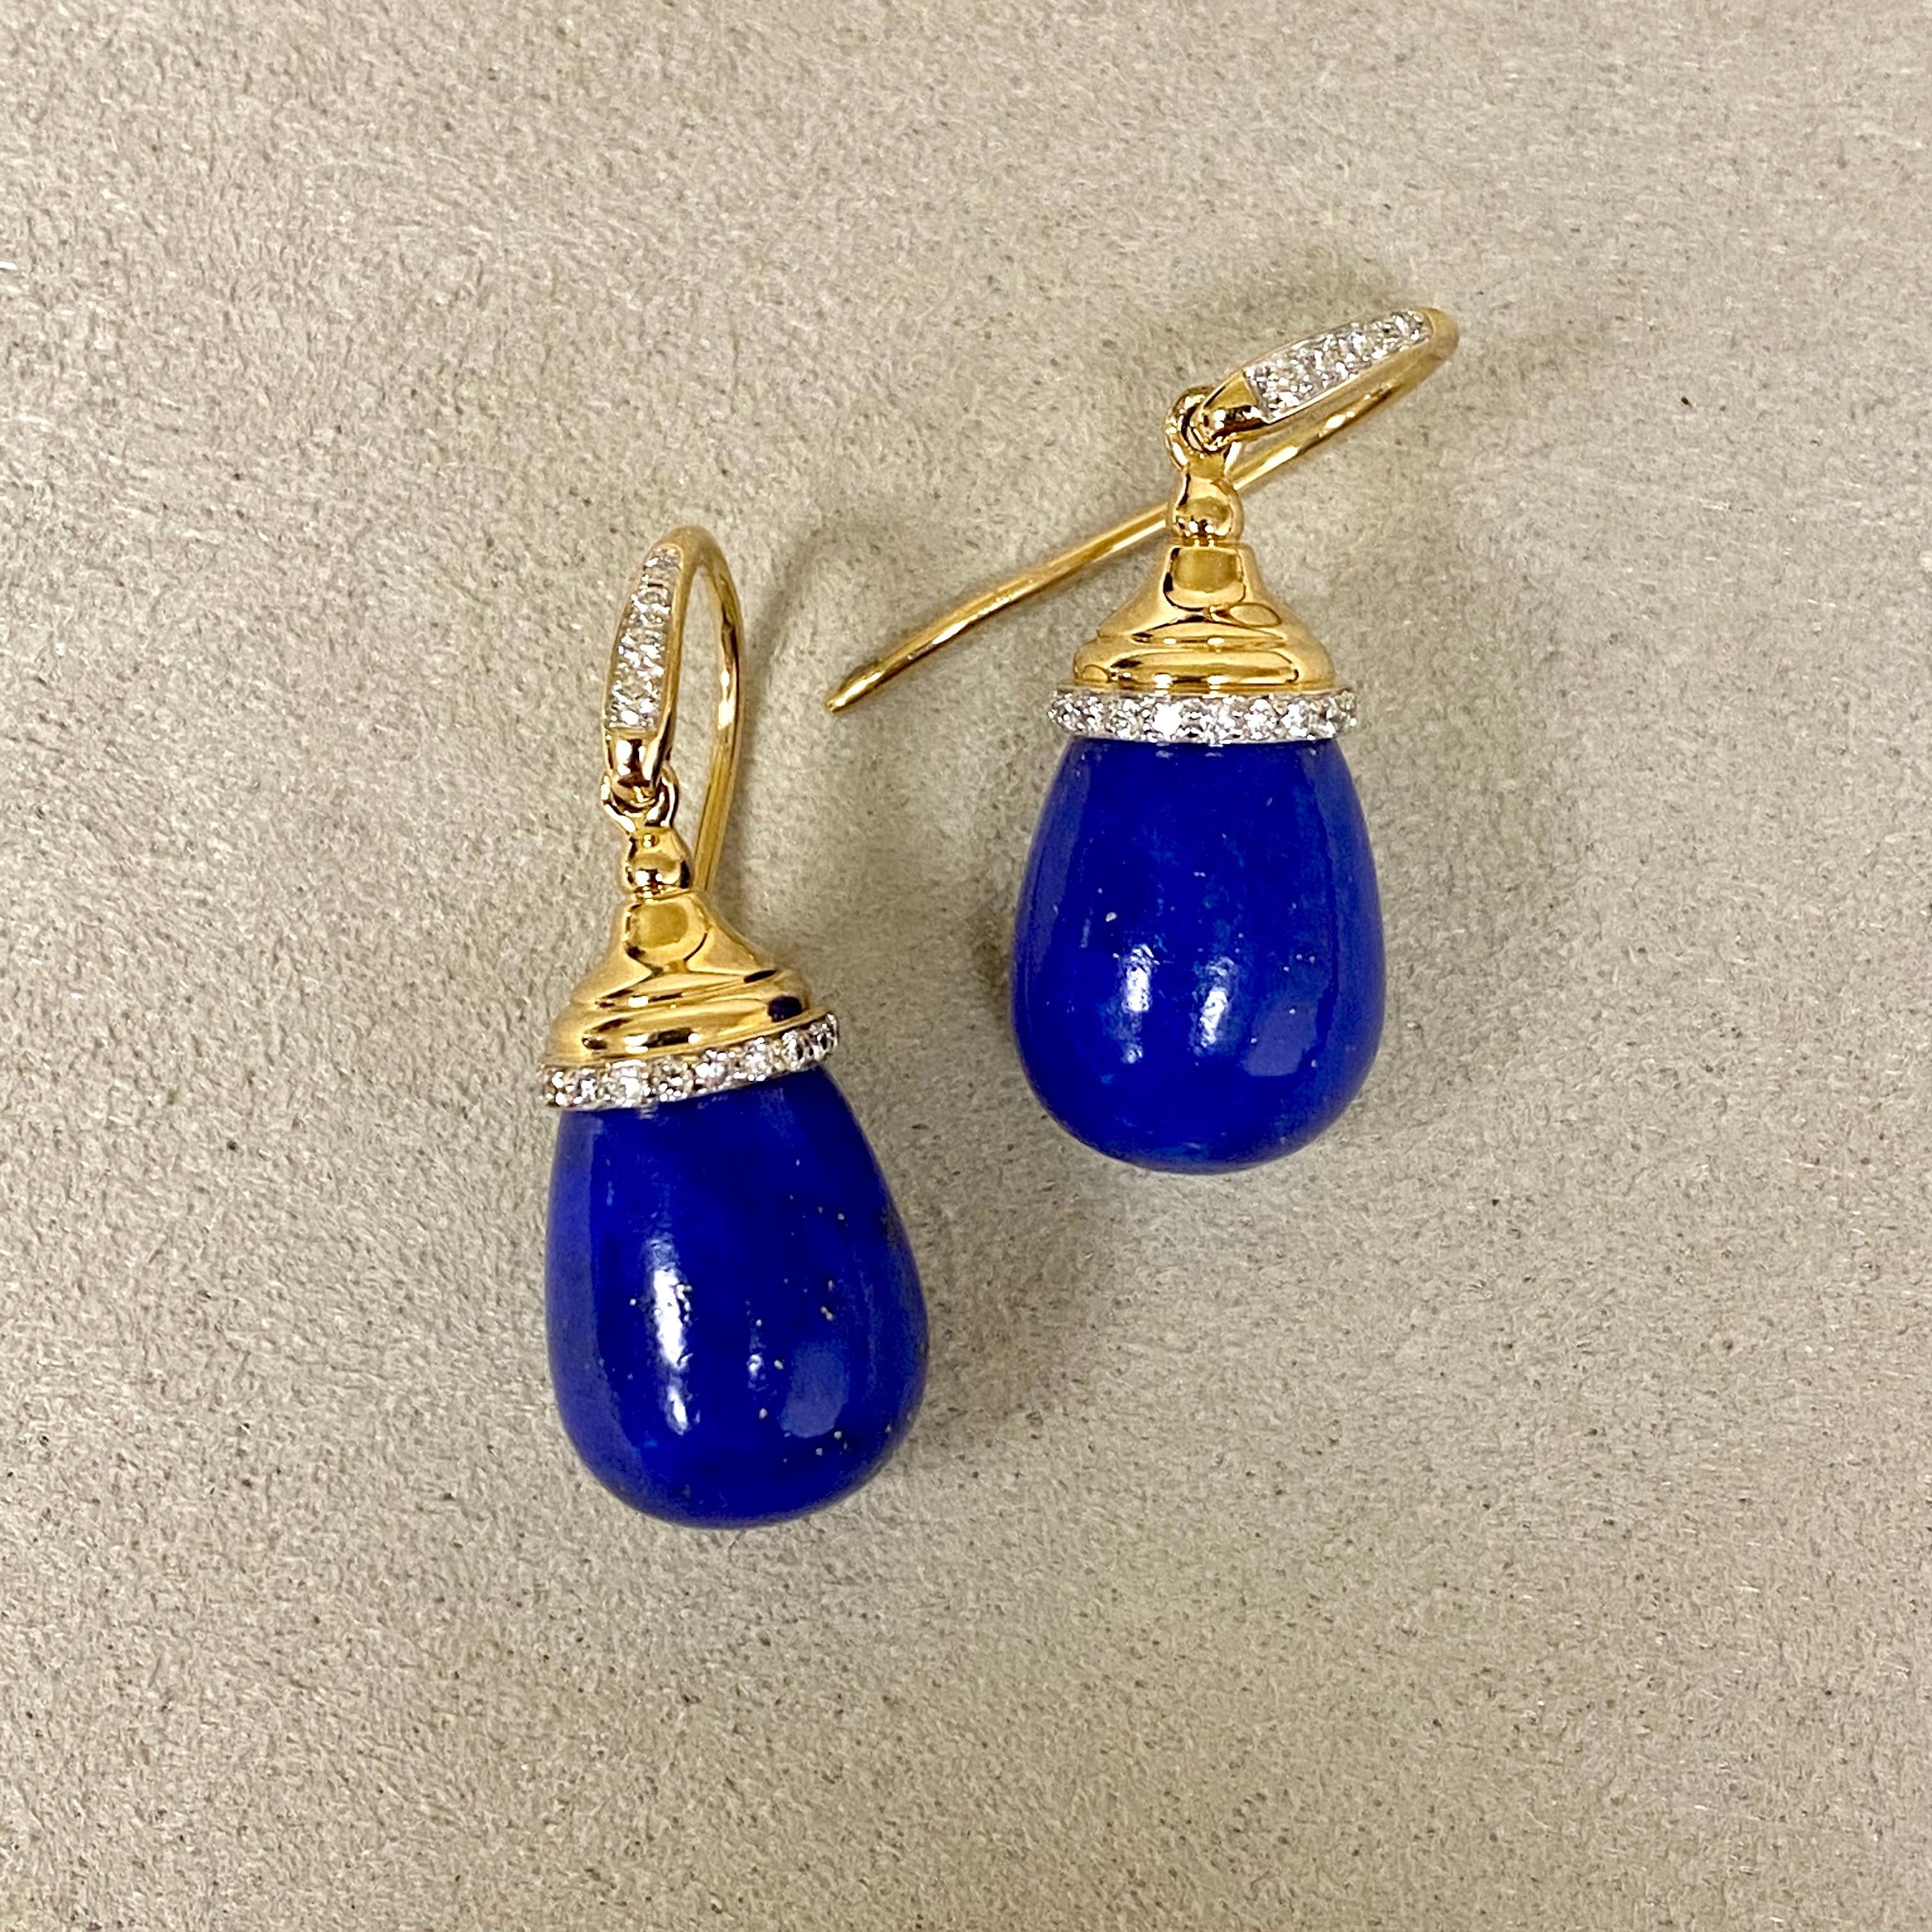 Created in 18kyg
Lapis Lazuli 20 cts approx
Diamonds 0.20 ct approx

These exquisite earrings are a mesmerizing confection of fine 18K yellow gold, 20 carat lapis lazuli and 0.20 carat diamond accents. Delicate candy blue topaz and moon quartz